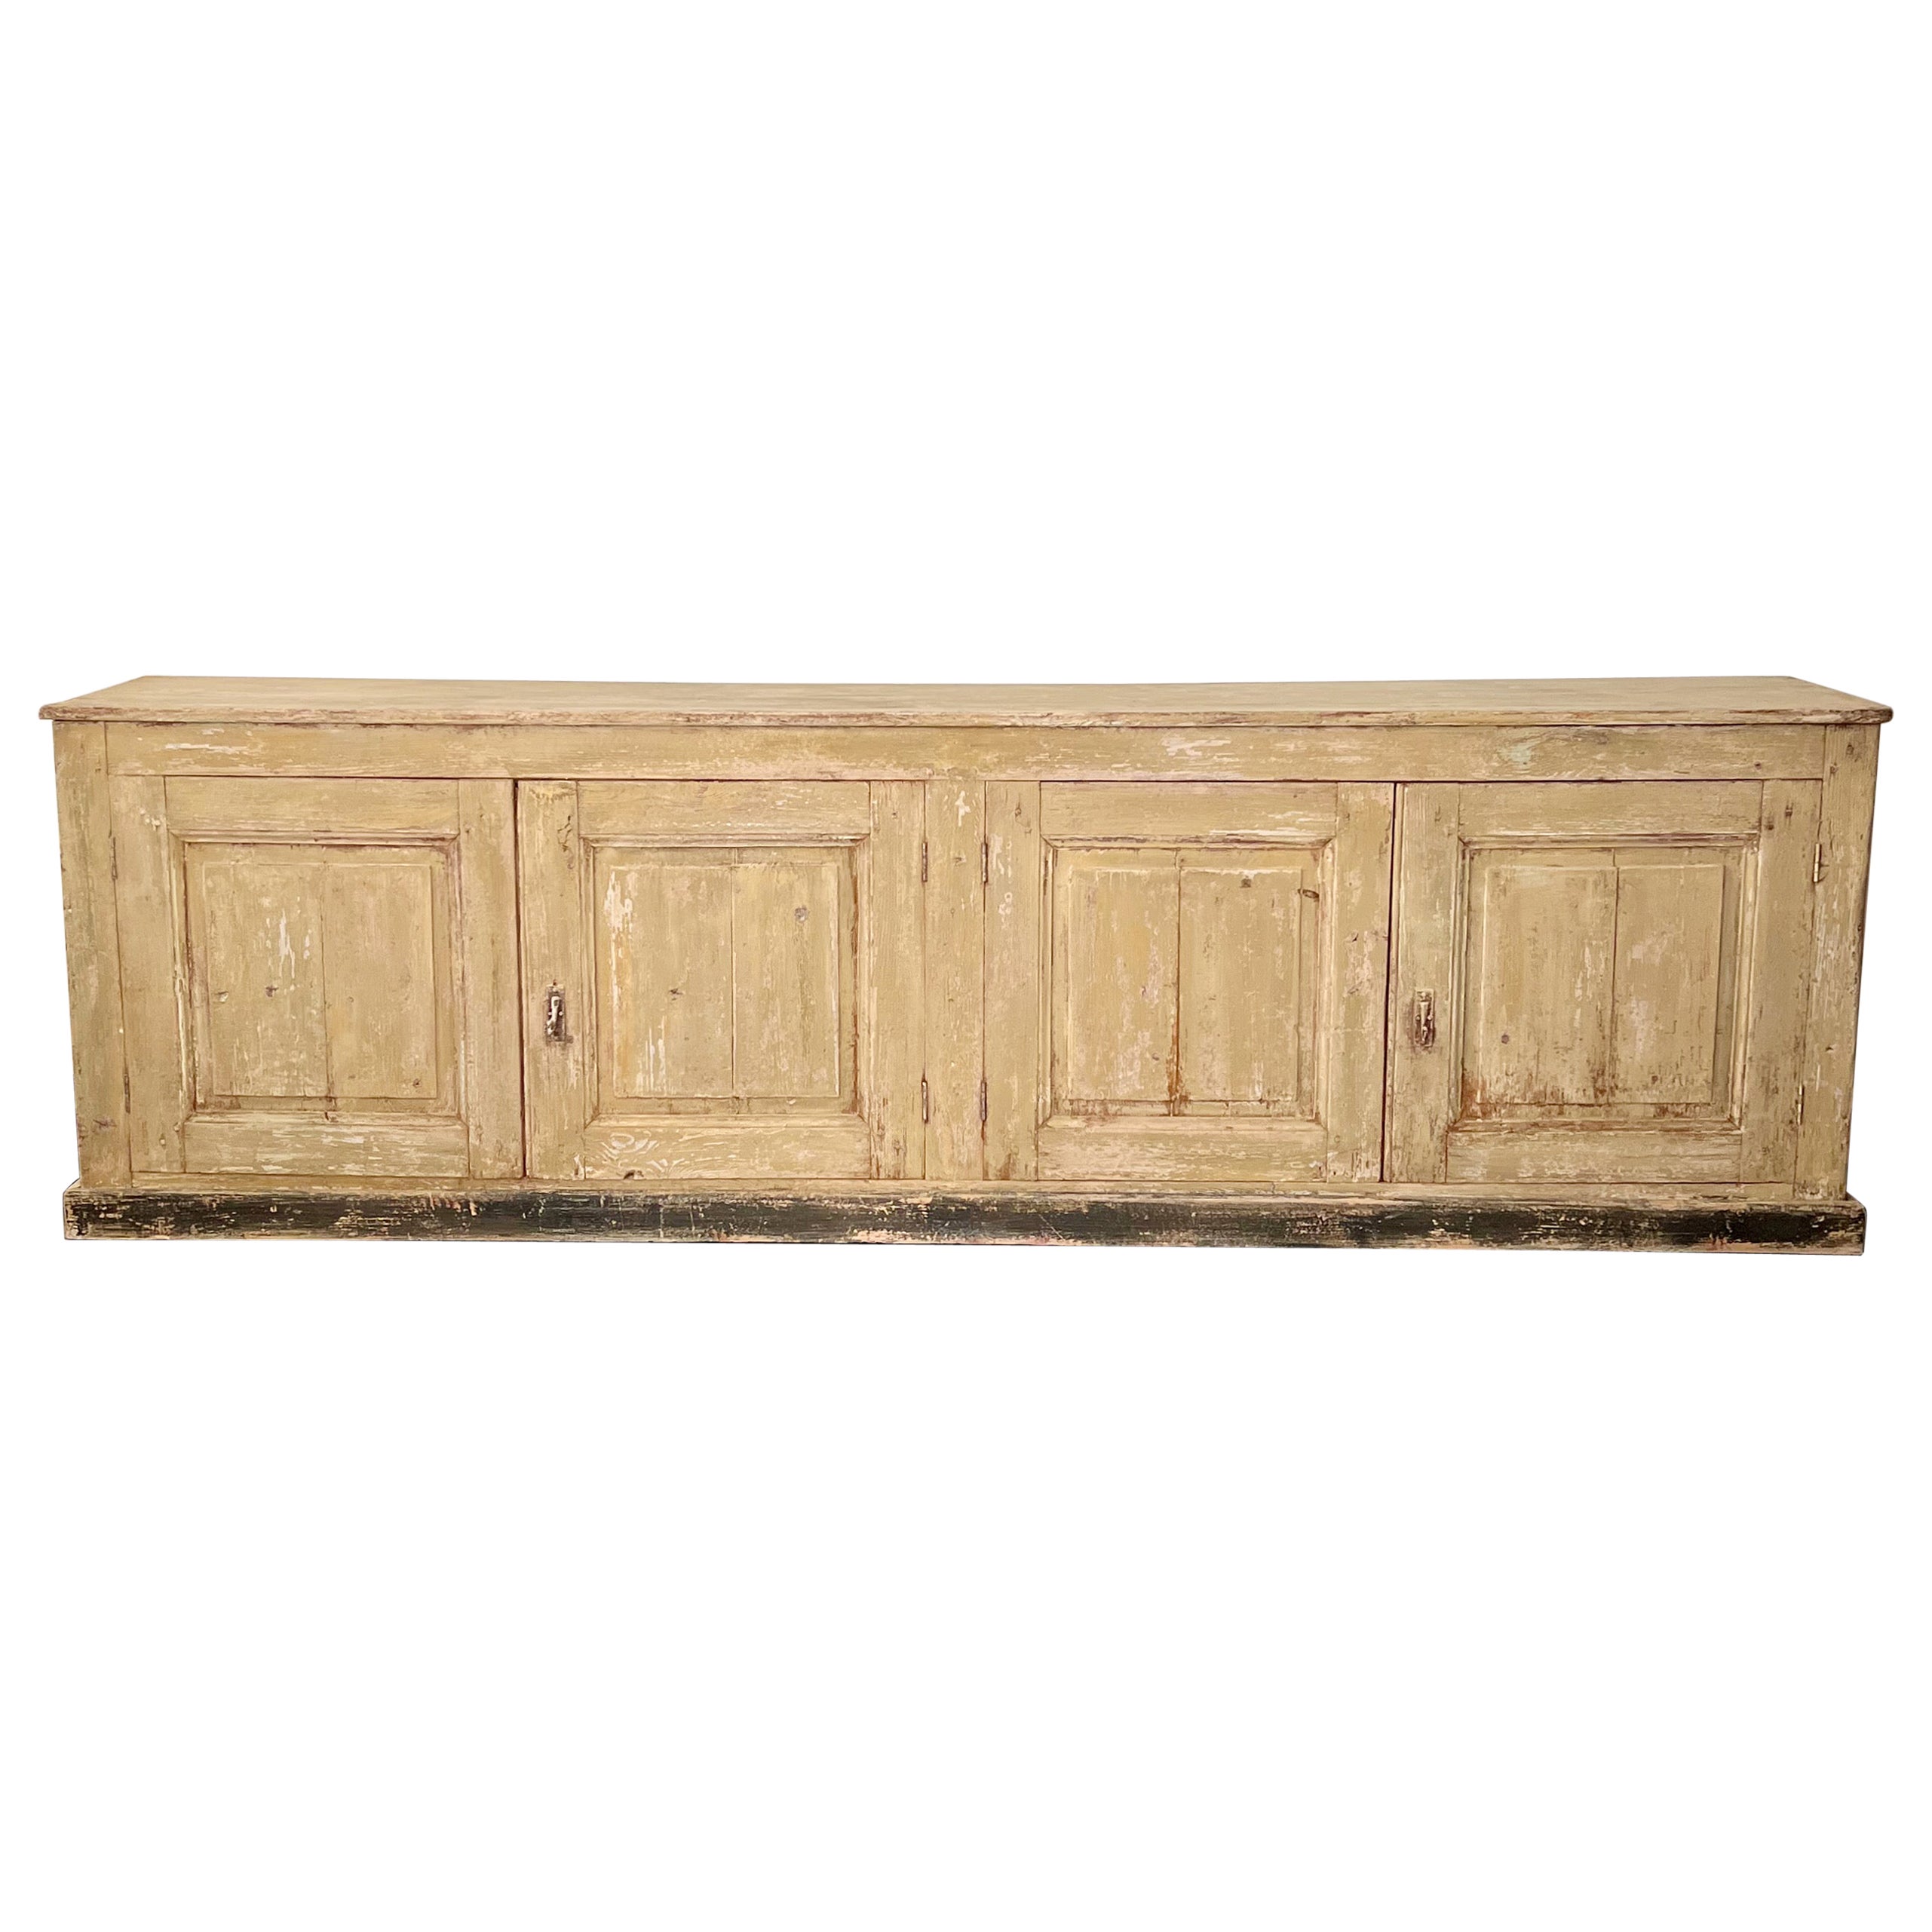 A very large four door 19th century Italian sideboard 